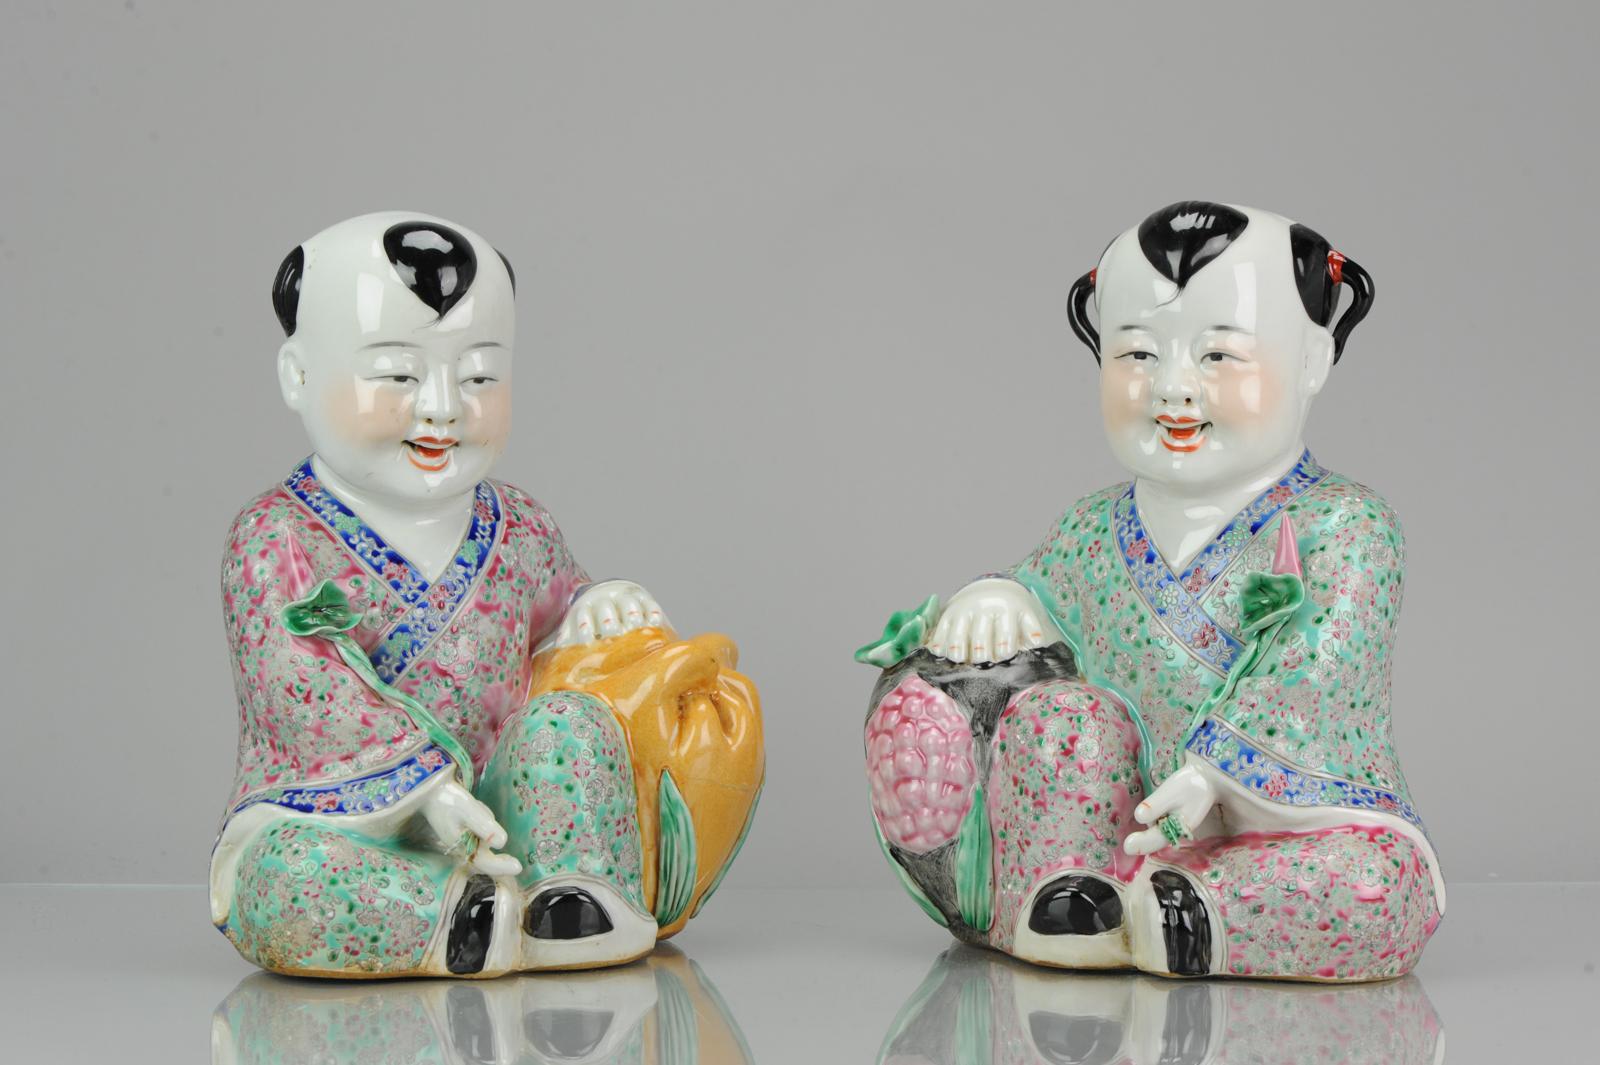 A very nicely decorated pair of statues

He-he Heavenly twins

The Heavenly twins are shown as two boys carrying a box and a lotus which symbolizes a wish for peace: 'hé' ? (box) and harmony ? hé (lotus). One may also be holding a bowl over